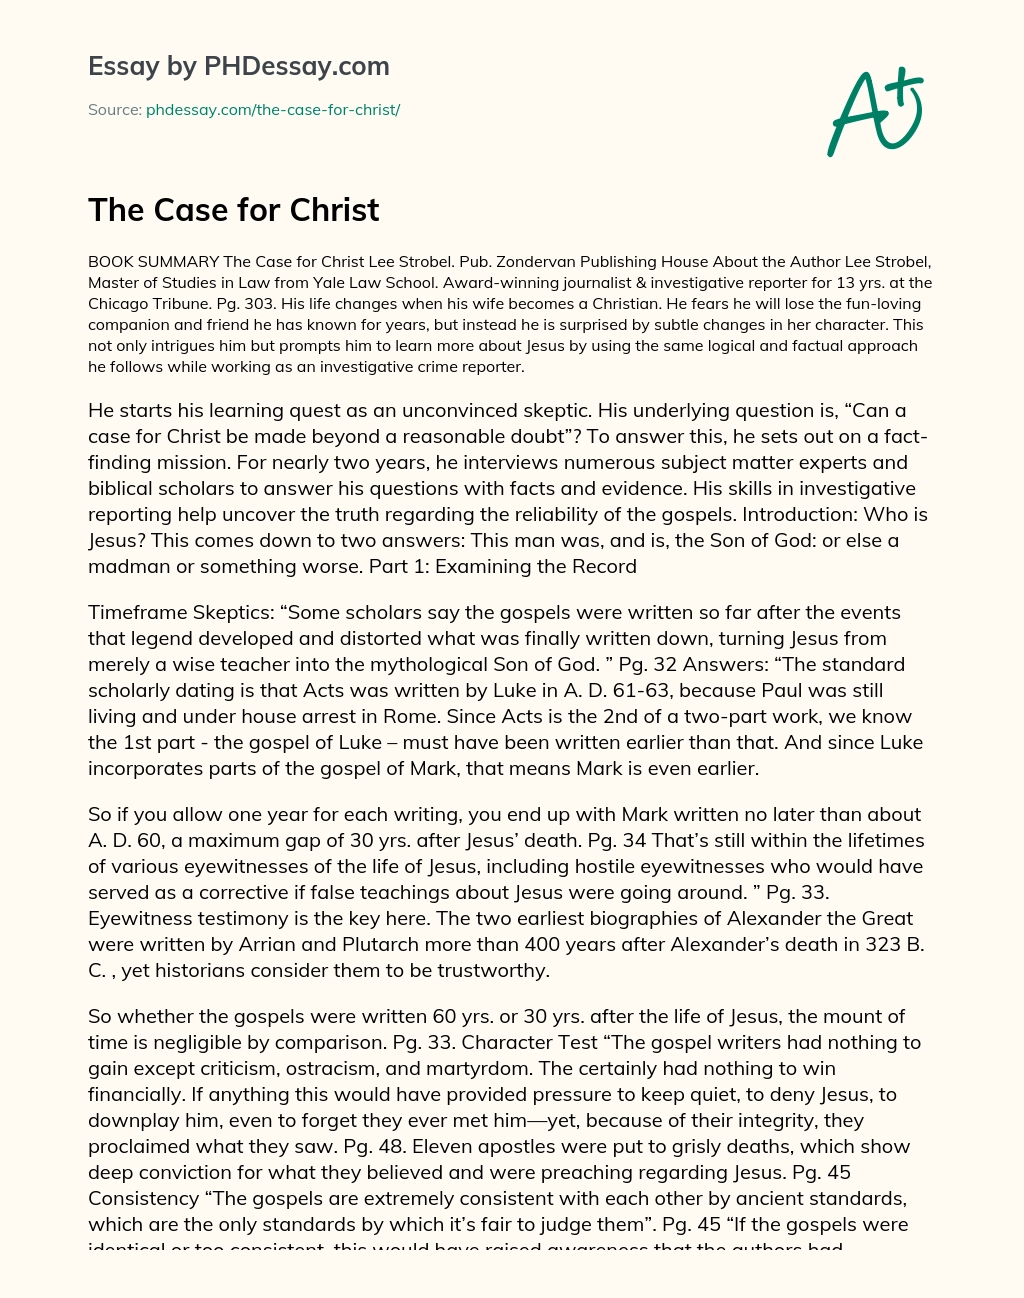 The Case for Christ essay